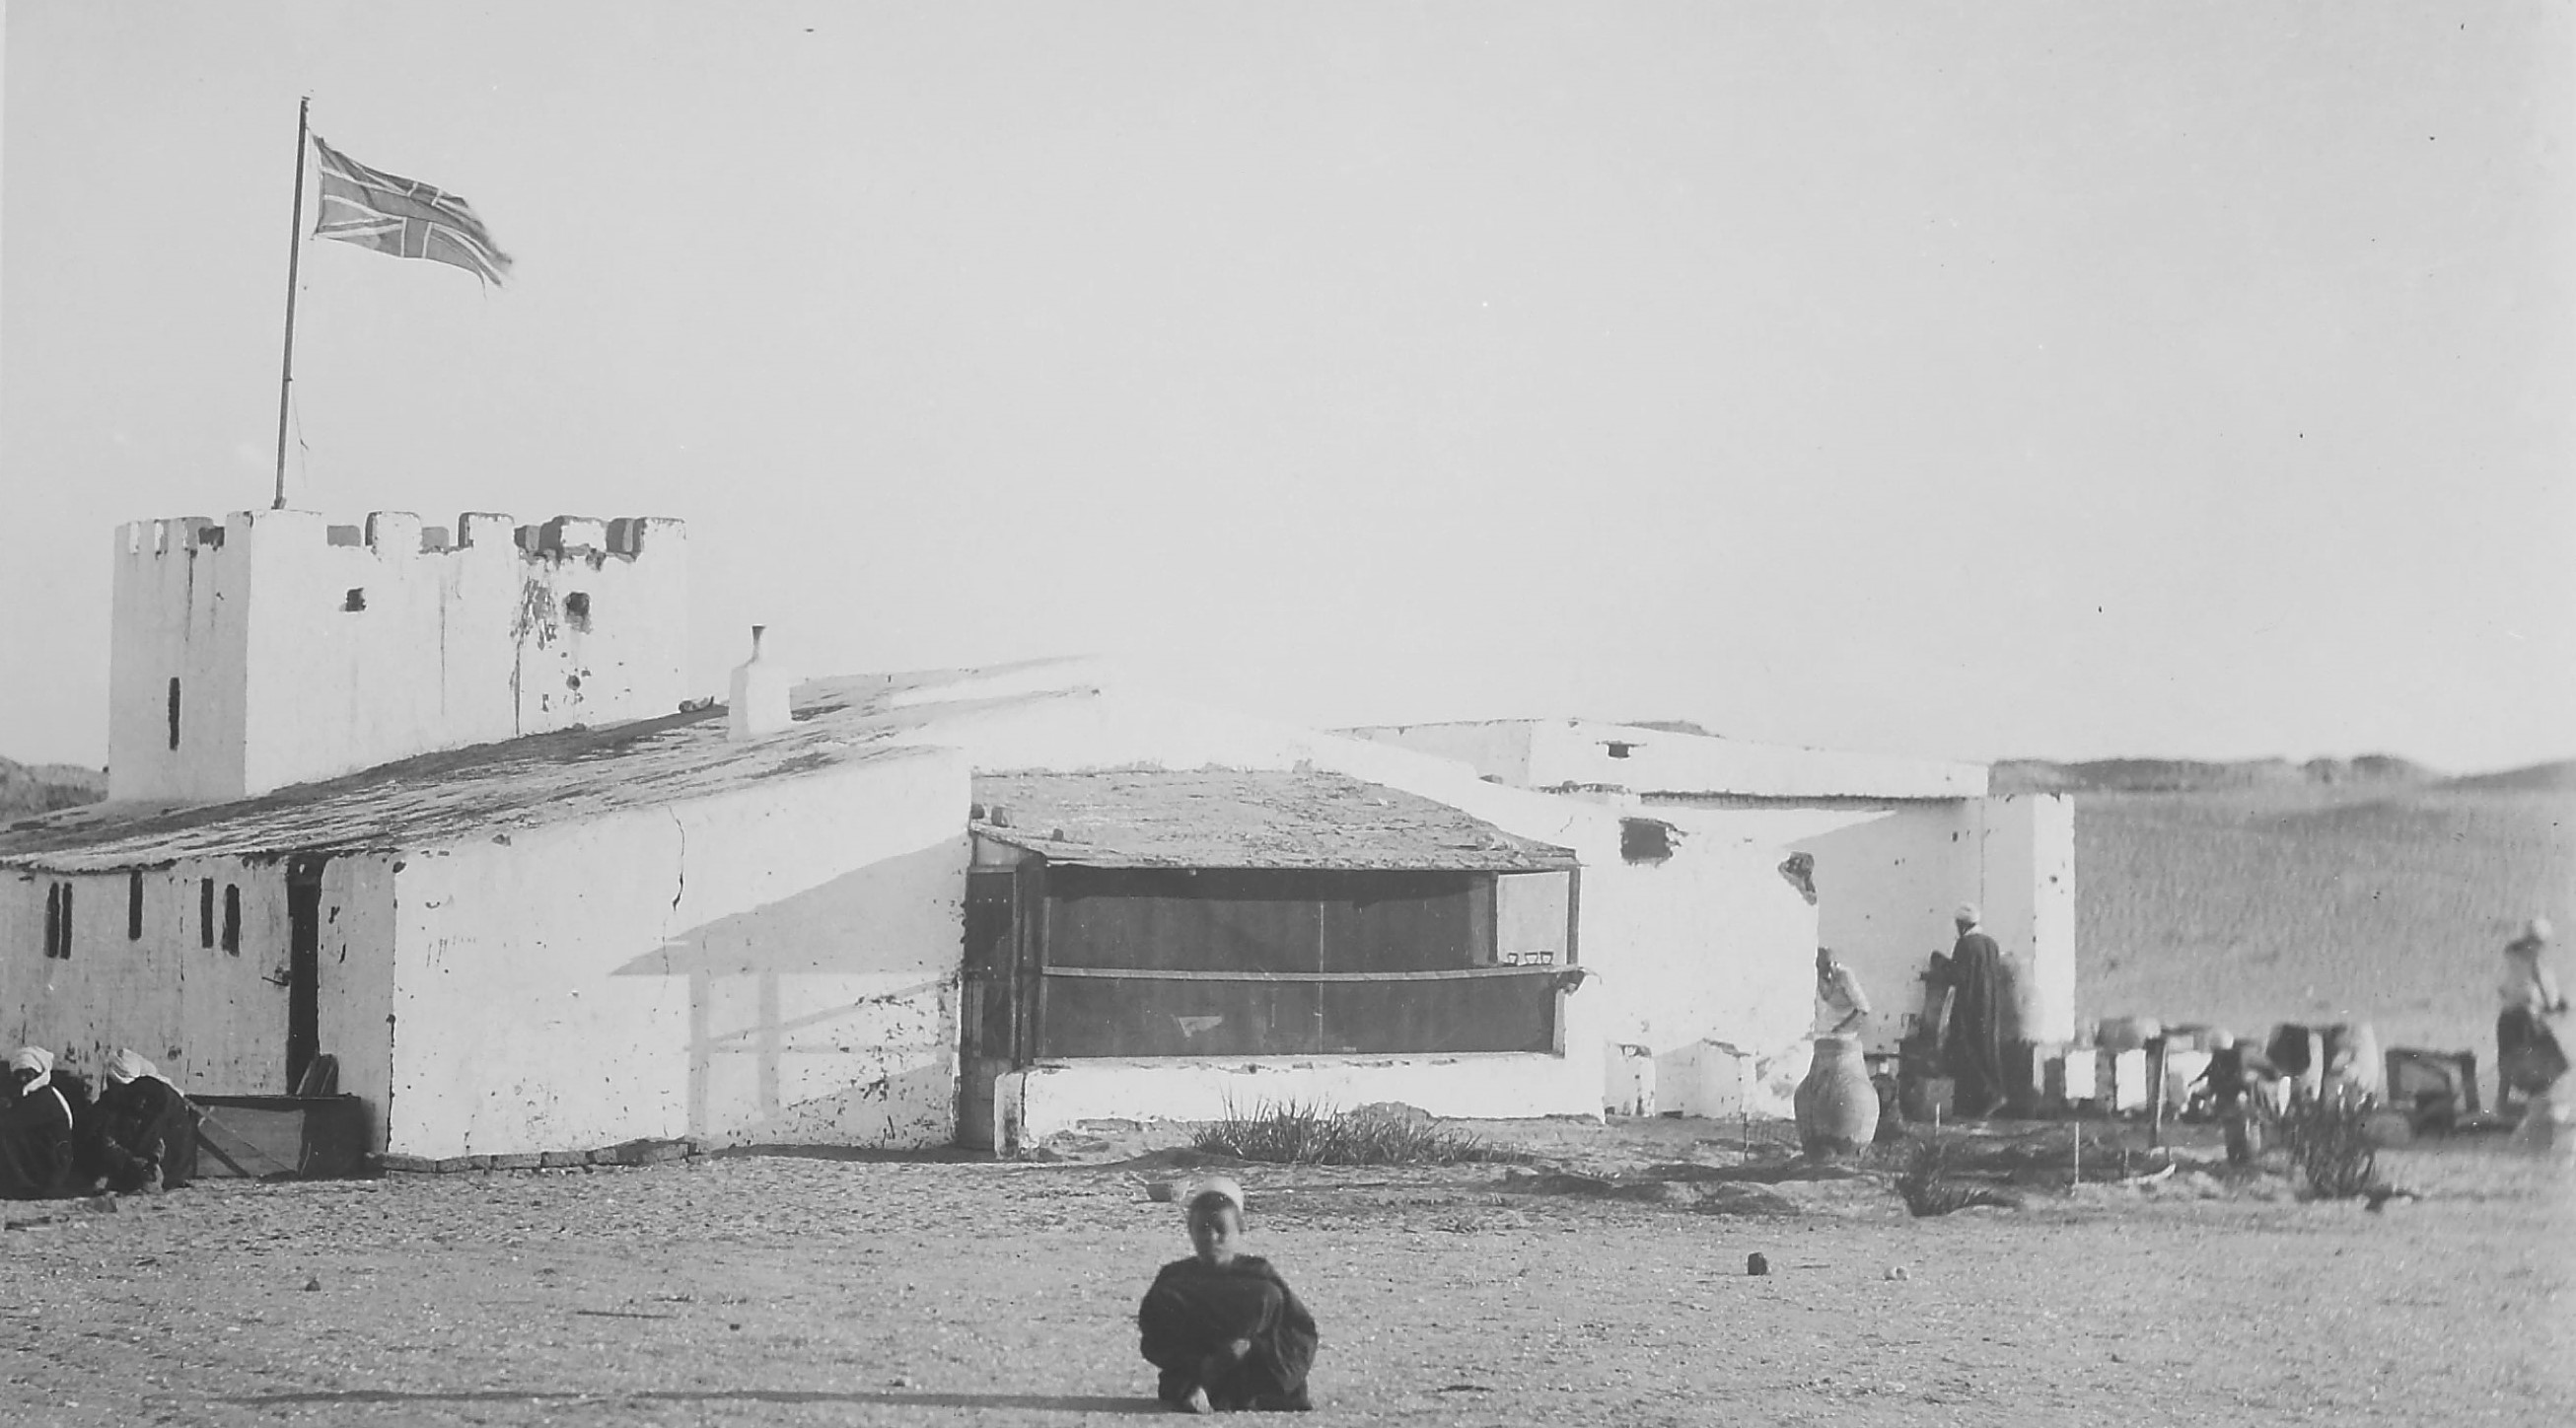 The “dig house” at Abydos